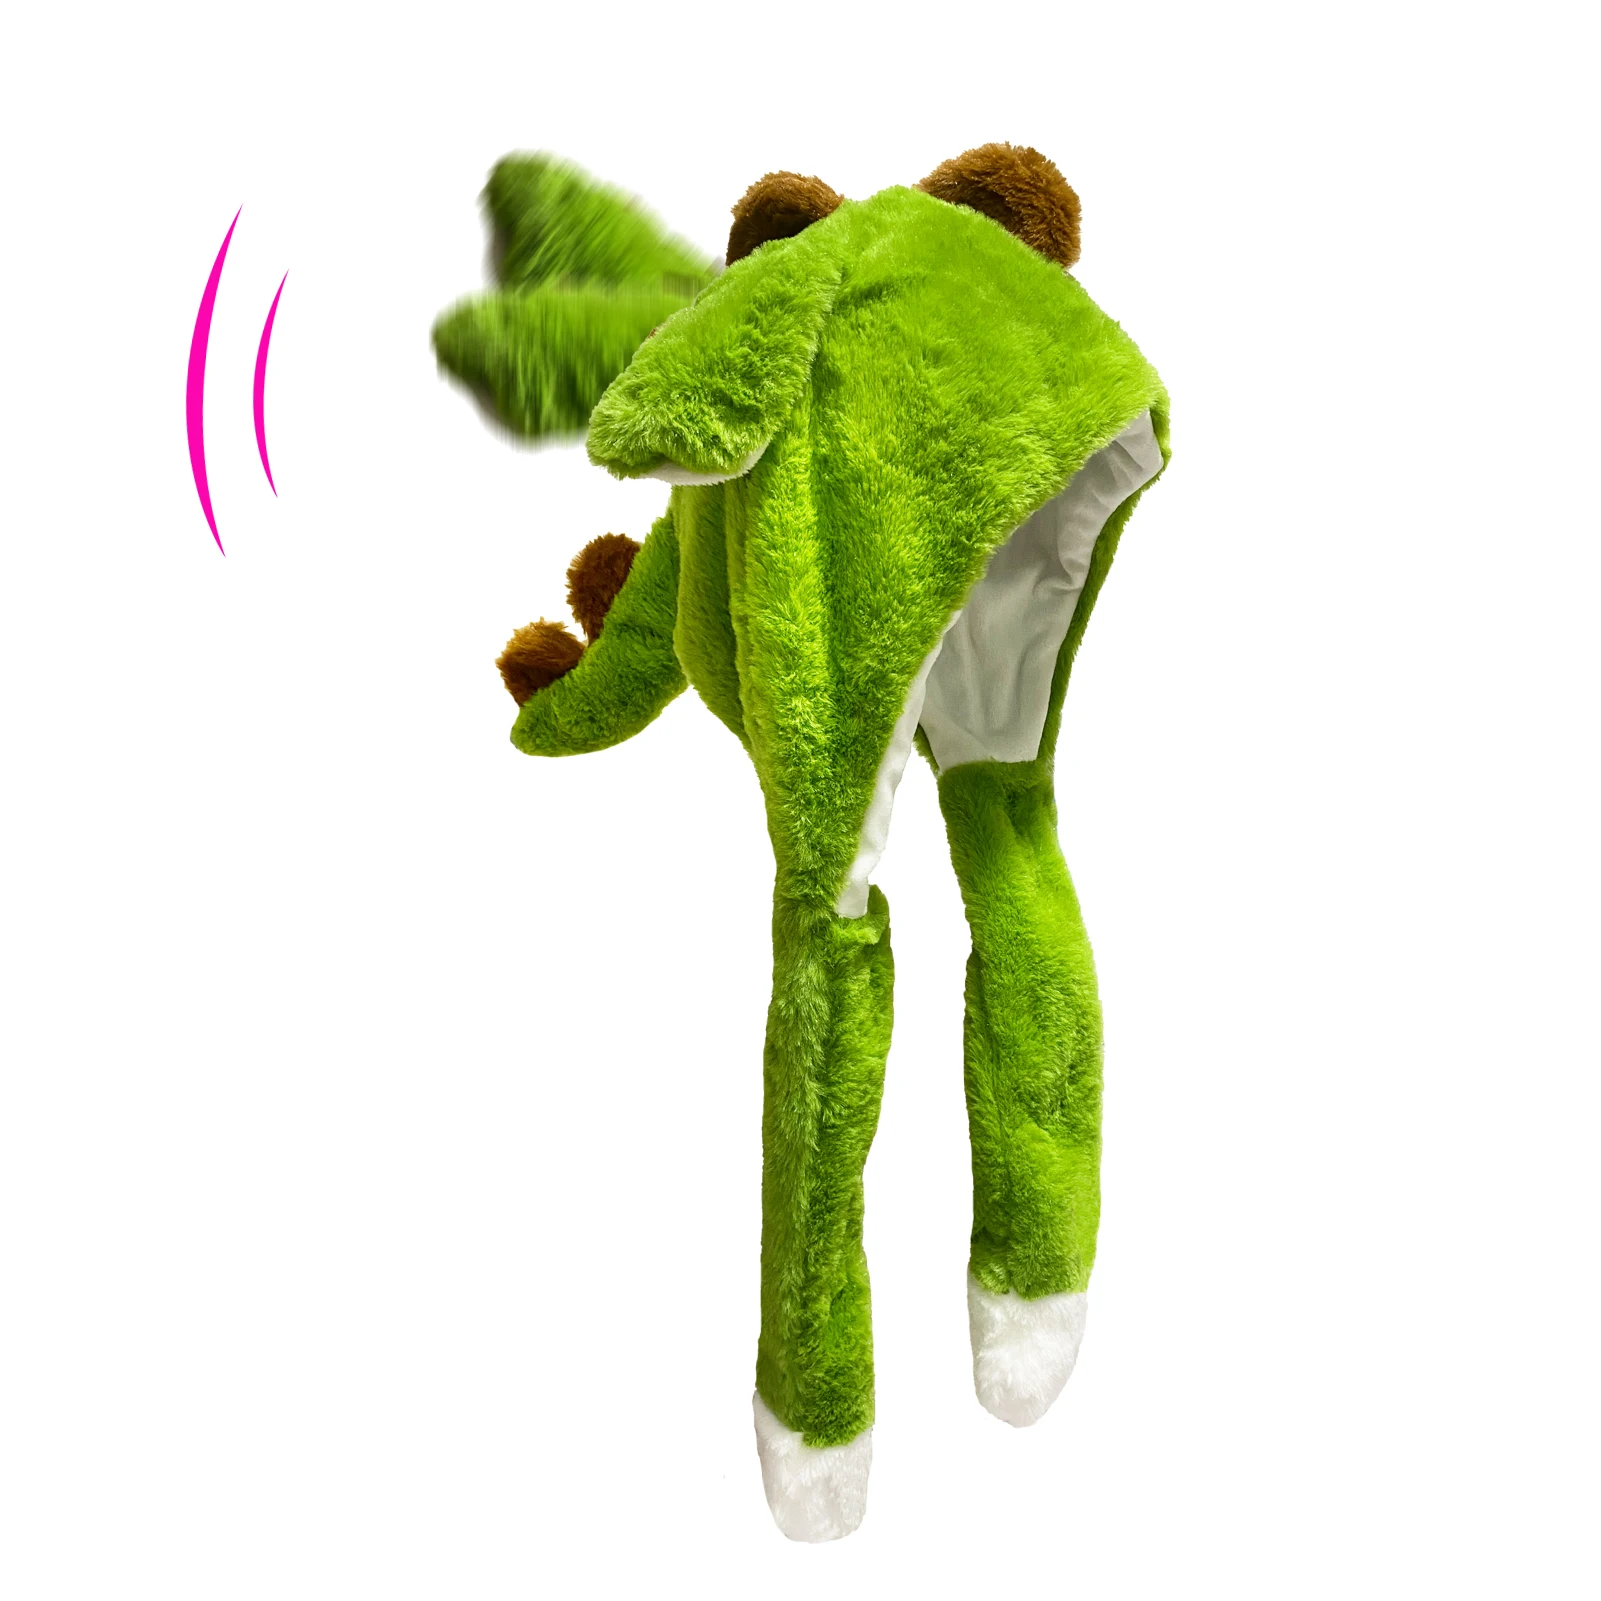 Dinosaur Ear Move Hat Plush Animal Moving Ear Hat Halloween Costume Winter Cap Elk Popup Ears Cap Christmas Funny Jumping Up Hat funny hat baby kids lighting hat cute rabbit ears plush ears can move cap children shine winter warm party hat baby boy hat